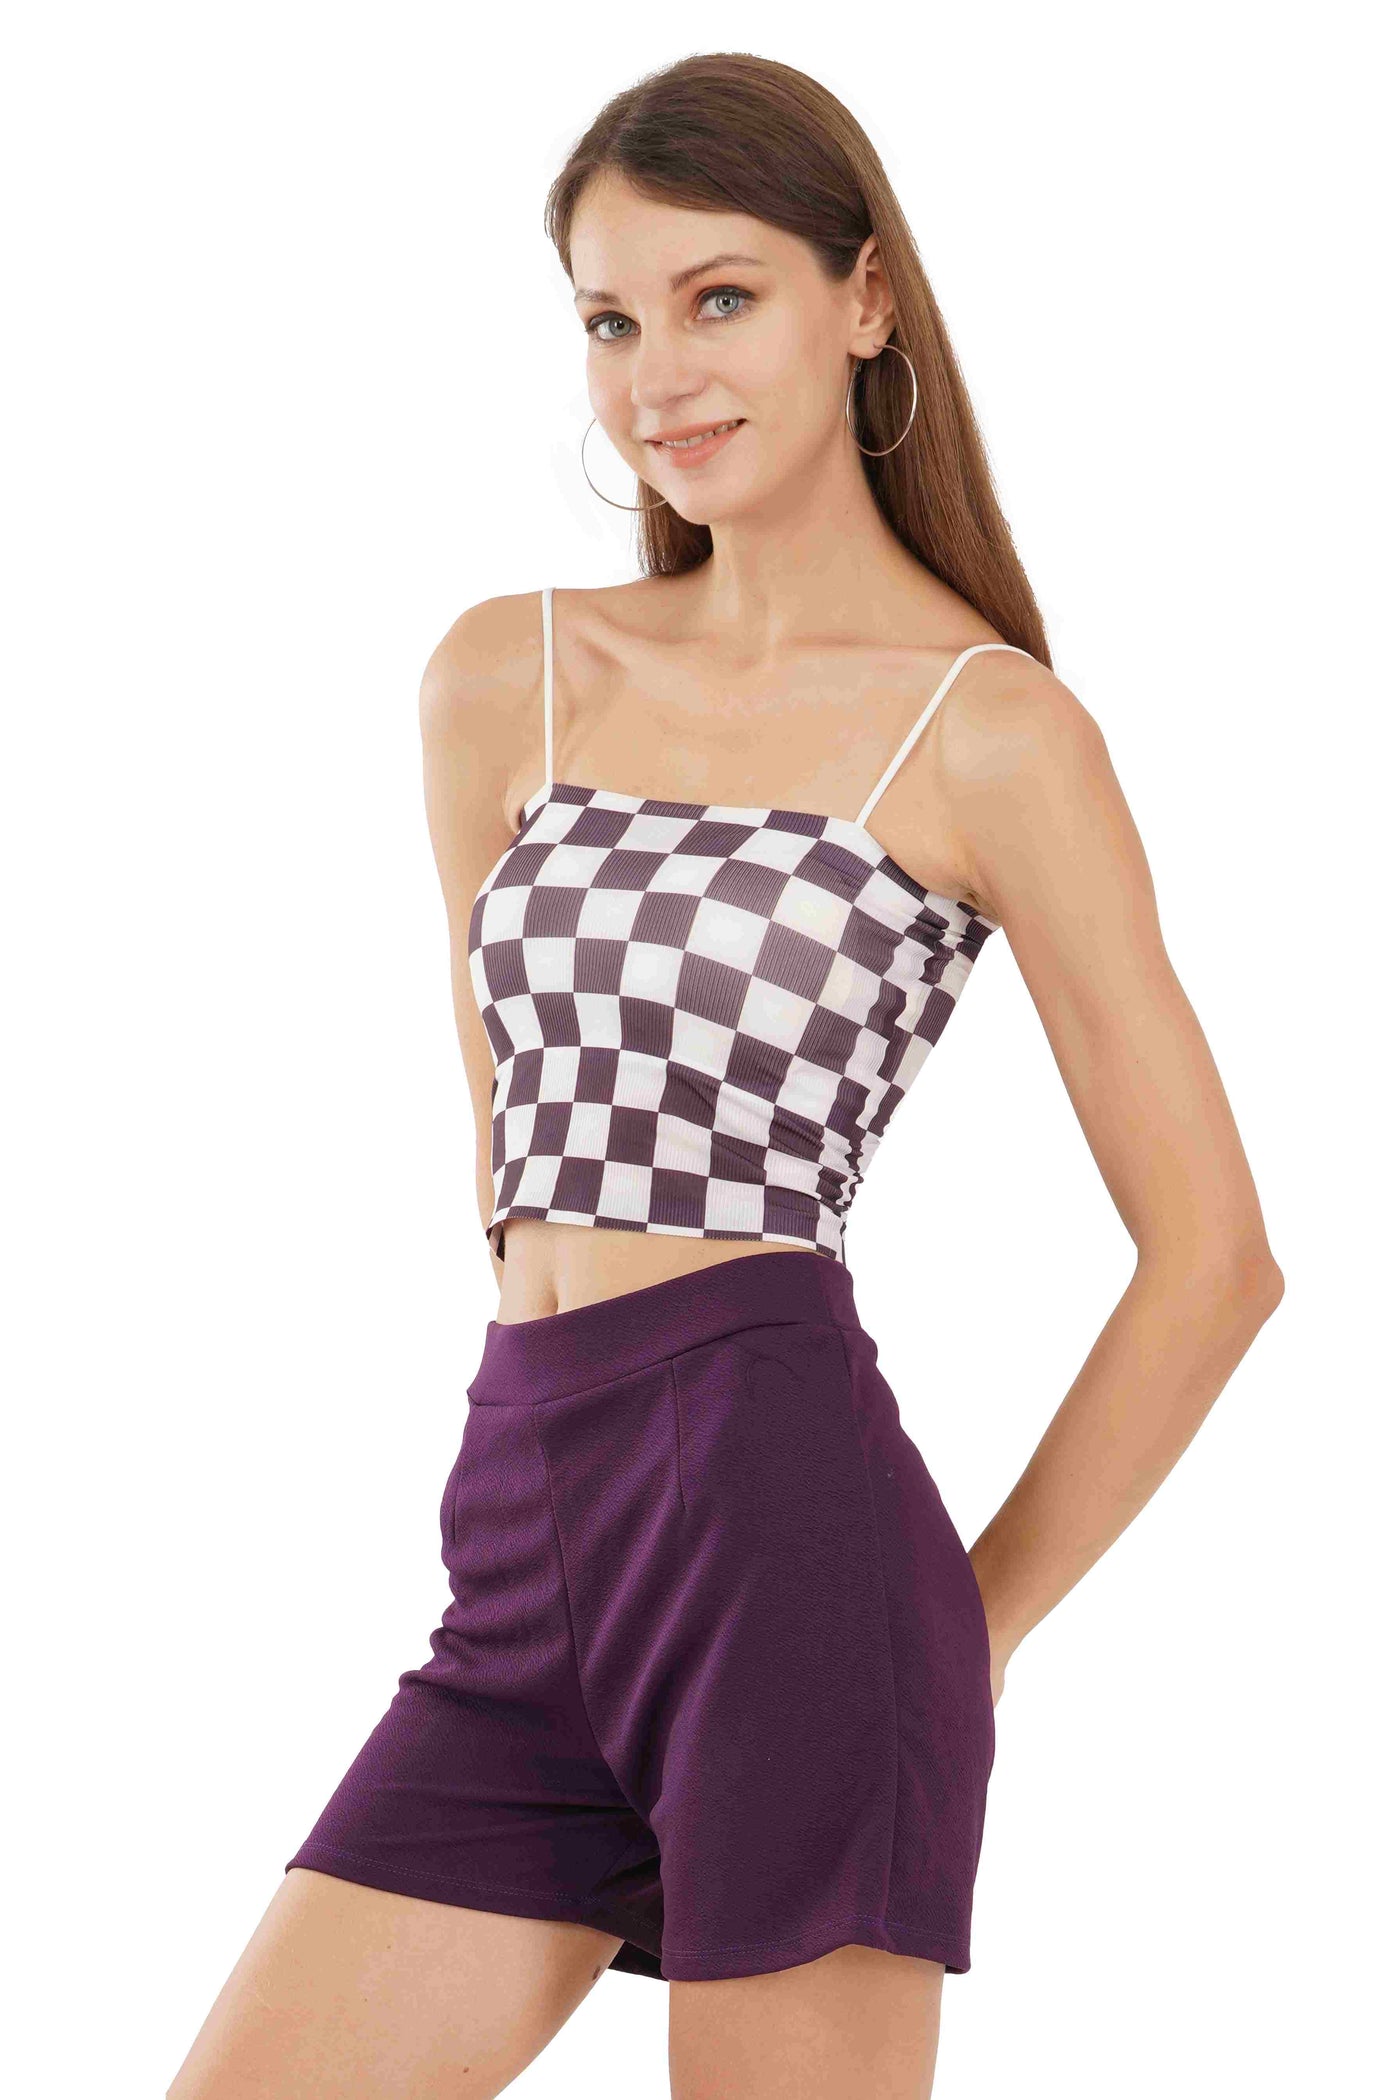 Black and White Top, Check Mate Top, Top at Sales